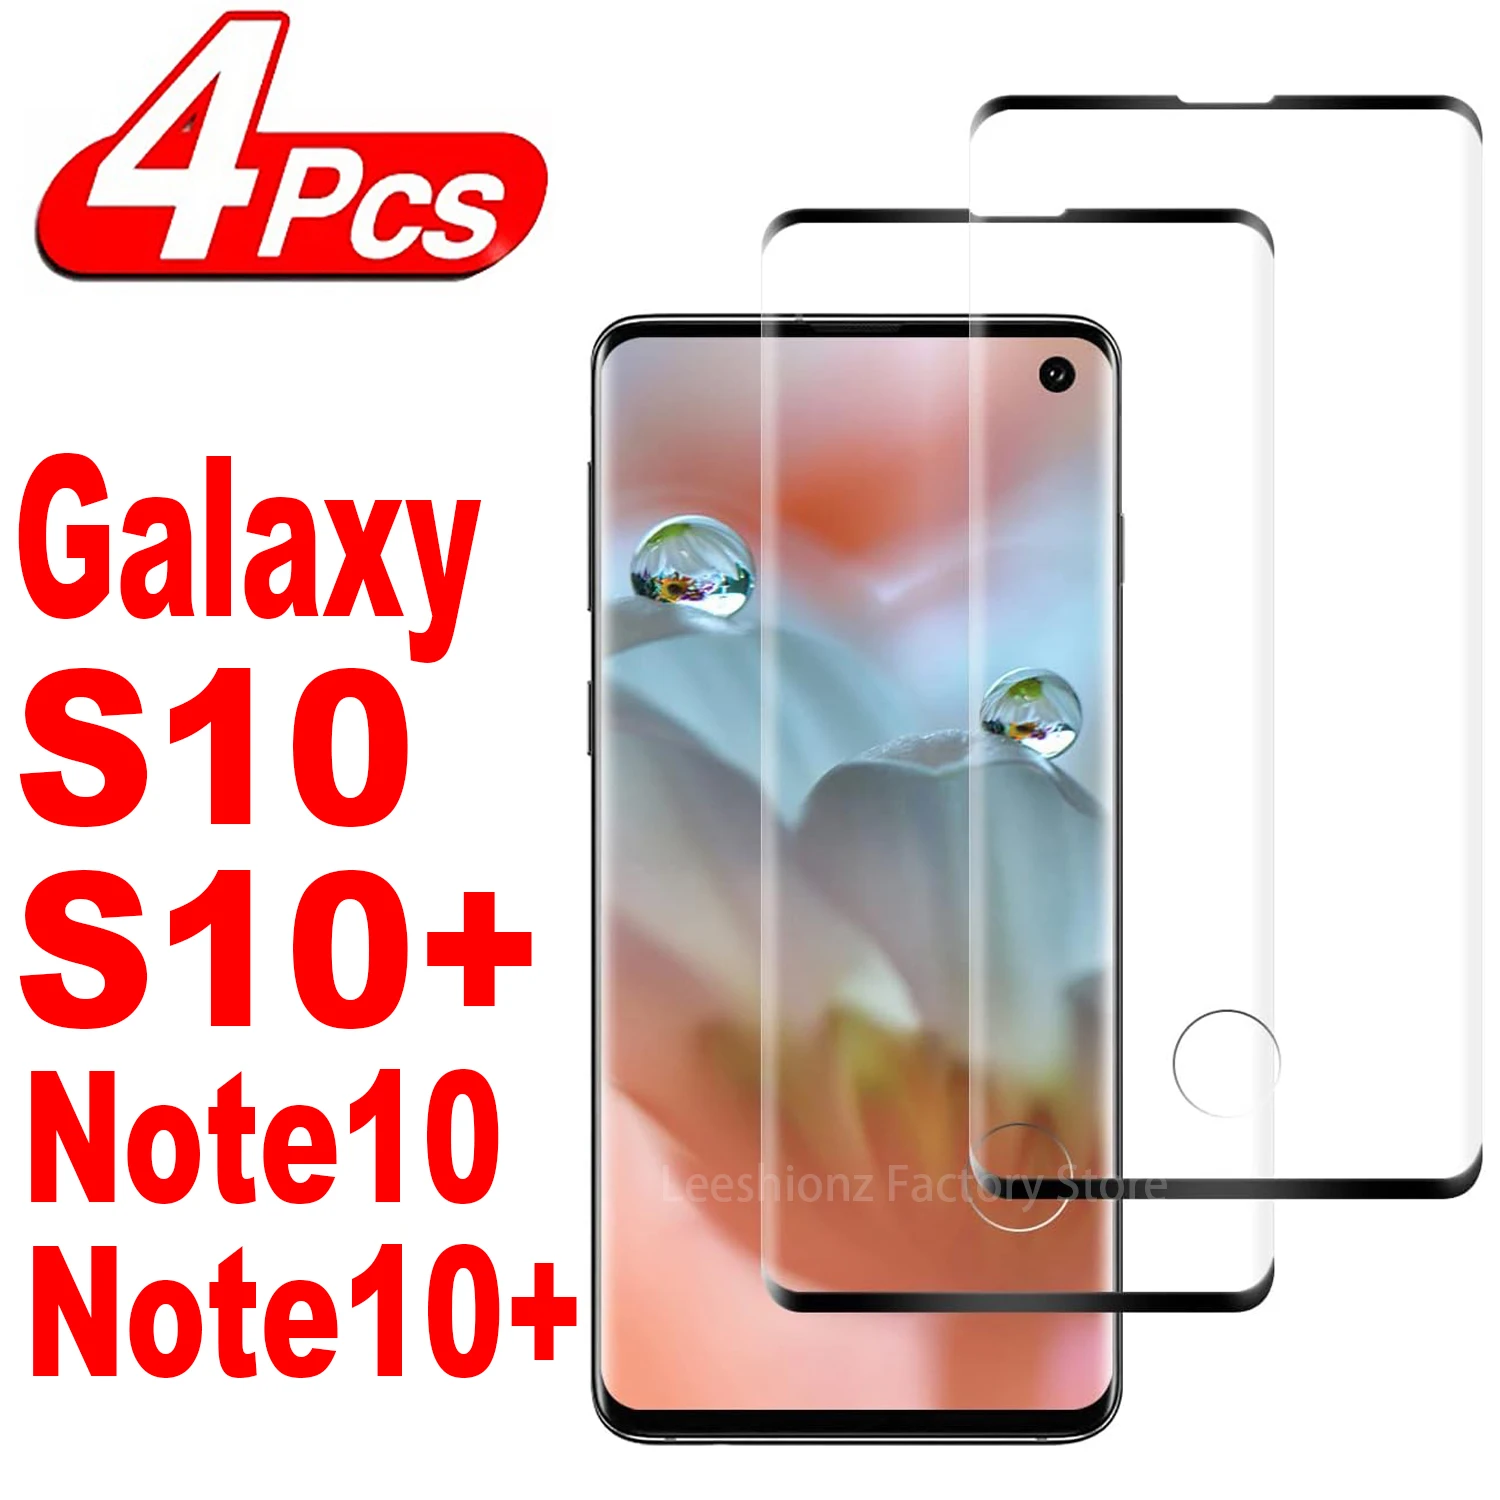 1/4Pcs 3D Screen Protector Glass For Samsung Galaxy S10 S10+ Note 10 Plus Note10+ Tempered Glass Film tempered glass for samsung note 10 lite glass screen protector for samsung s20 fe s10 s10e s 10 lit note10 light protective film